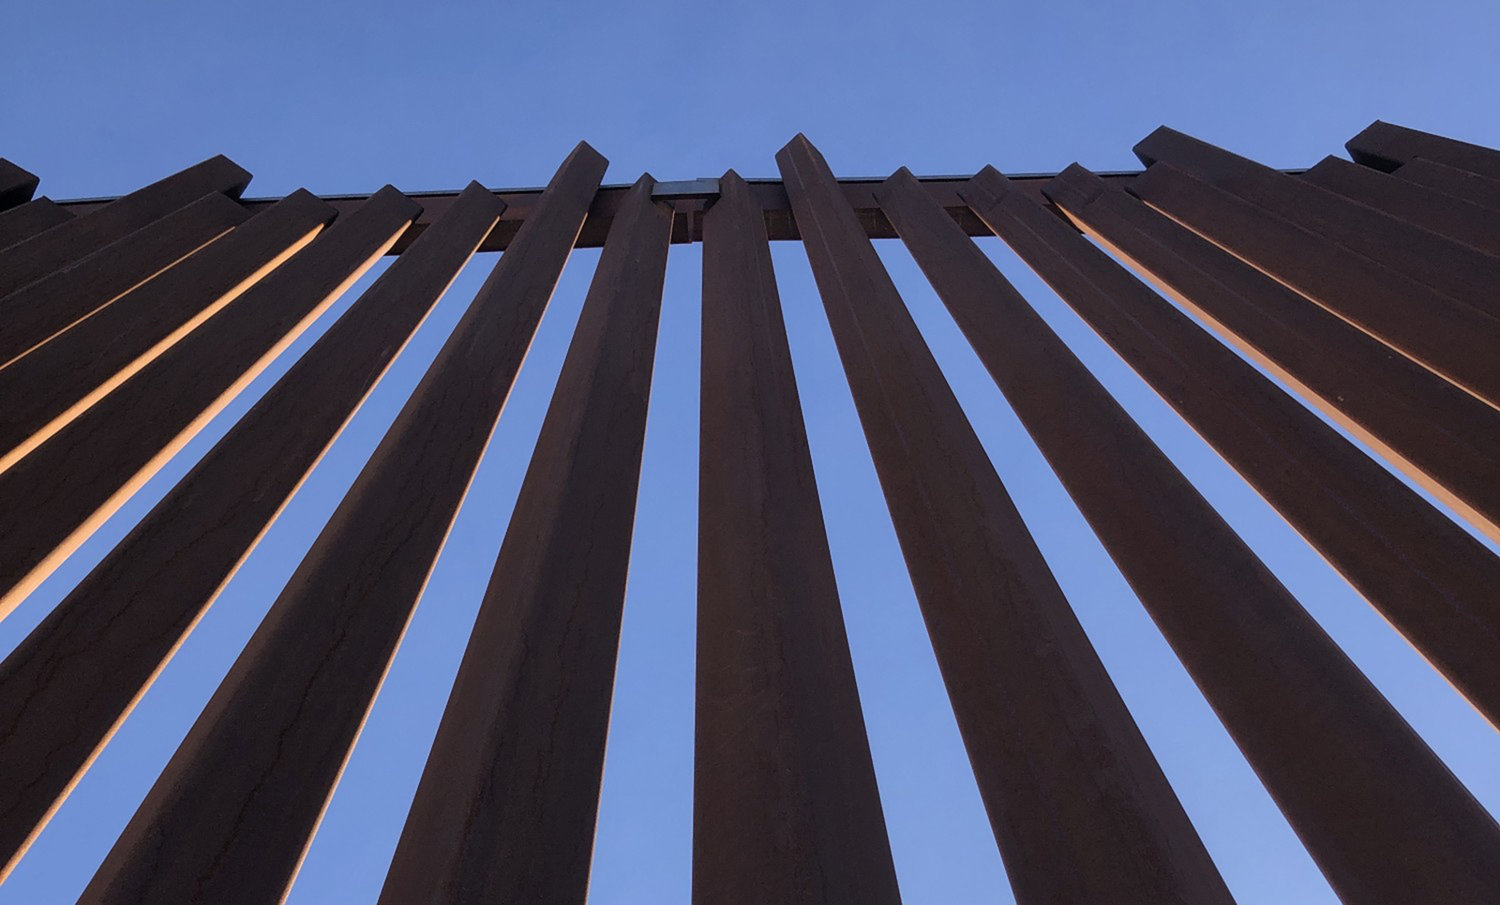 A new section of border wall constructed in a remote expanse of desert outside Yuma, Arizona, under the Trump administration. (Molly O'Toole/Los Angeles Times/TNS)